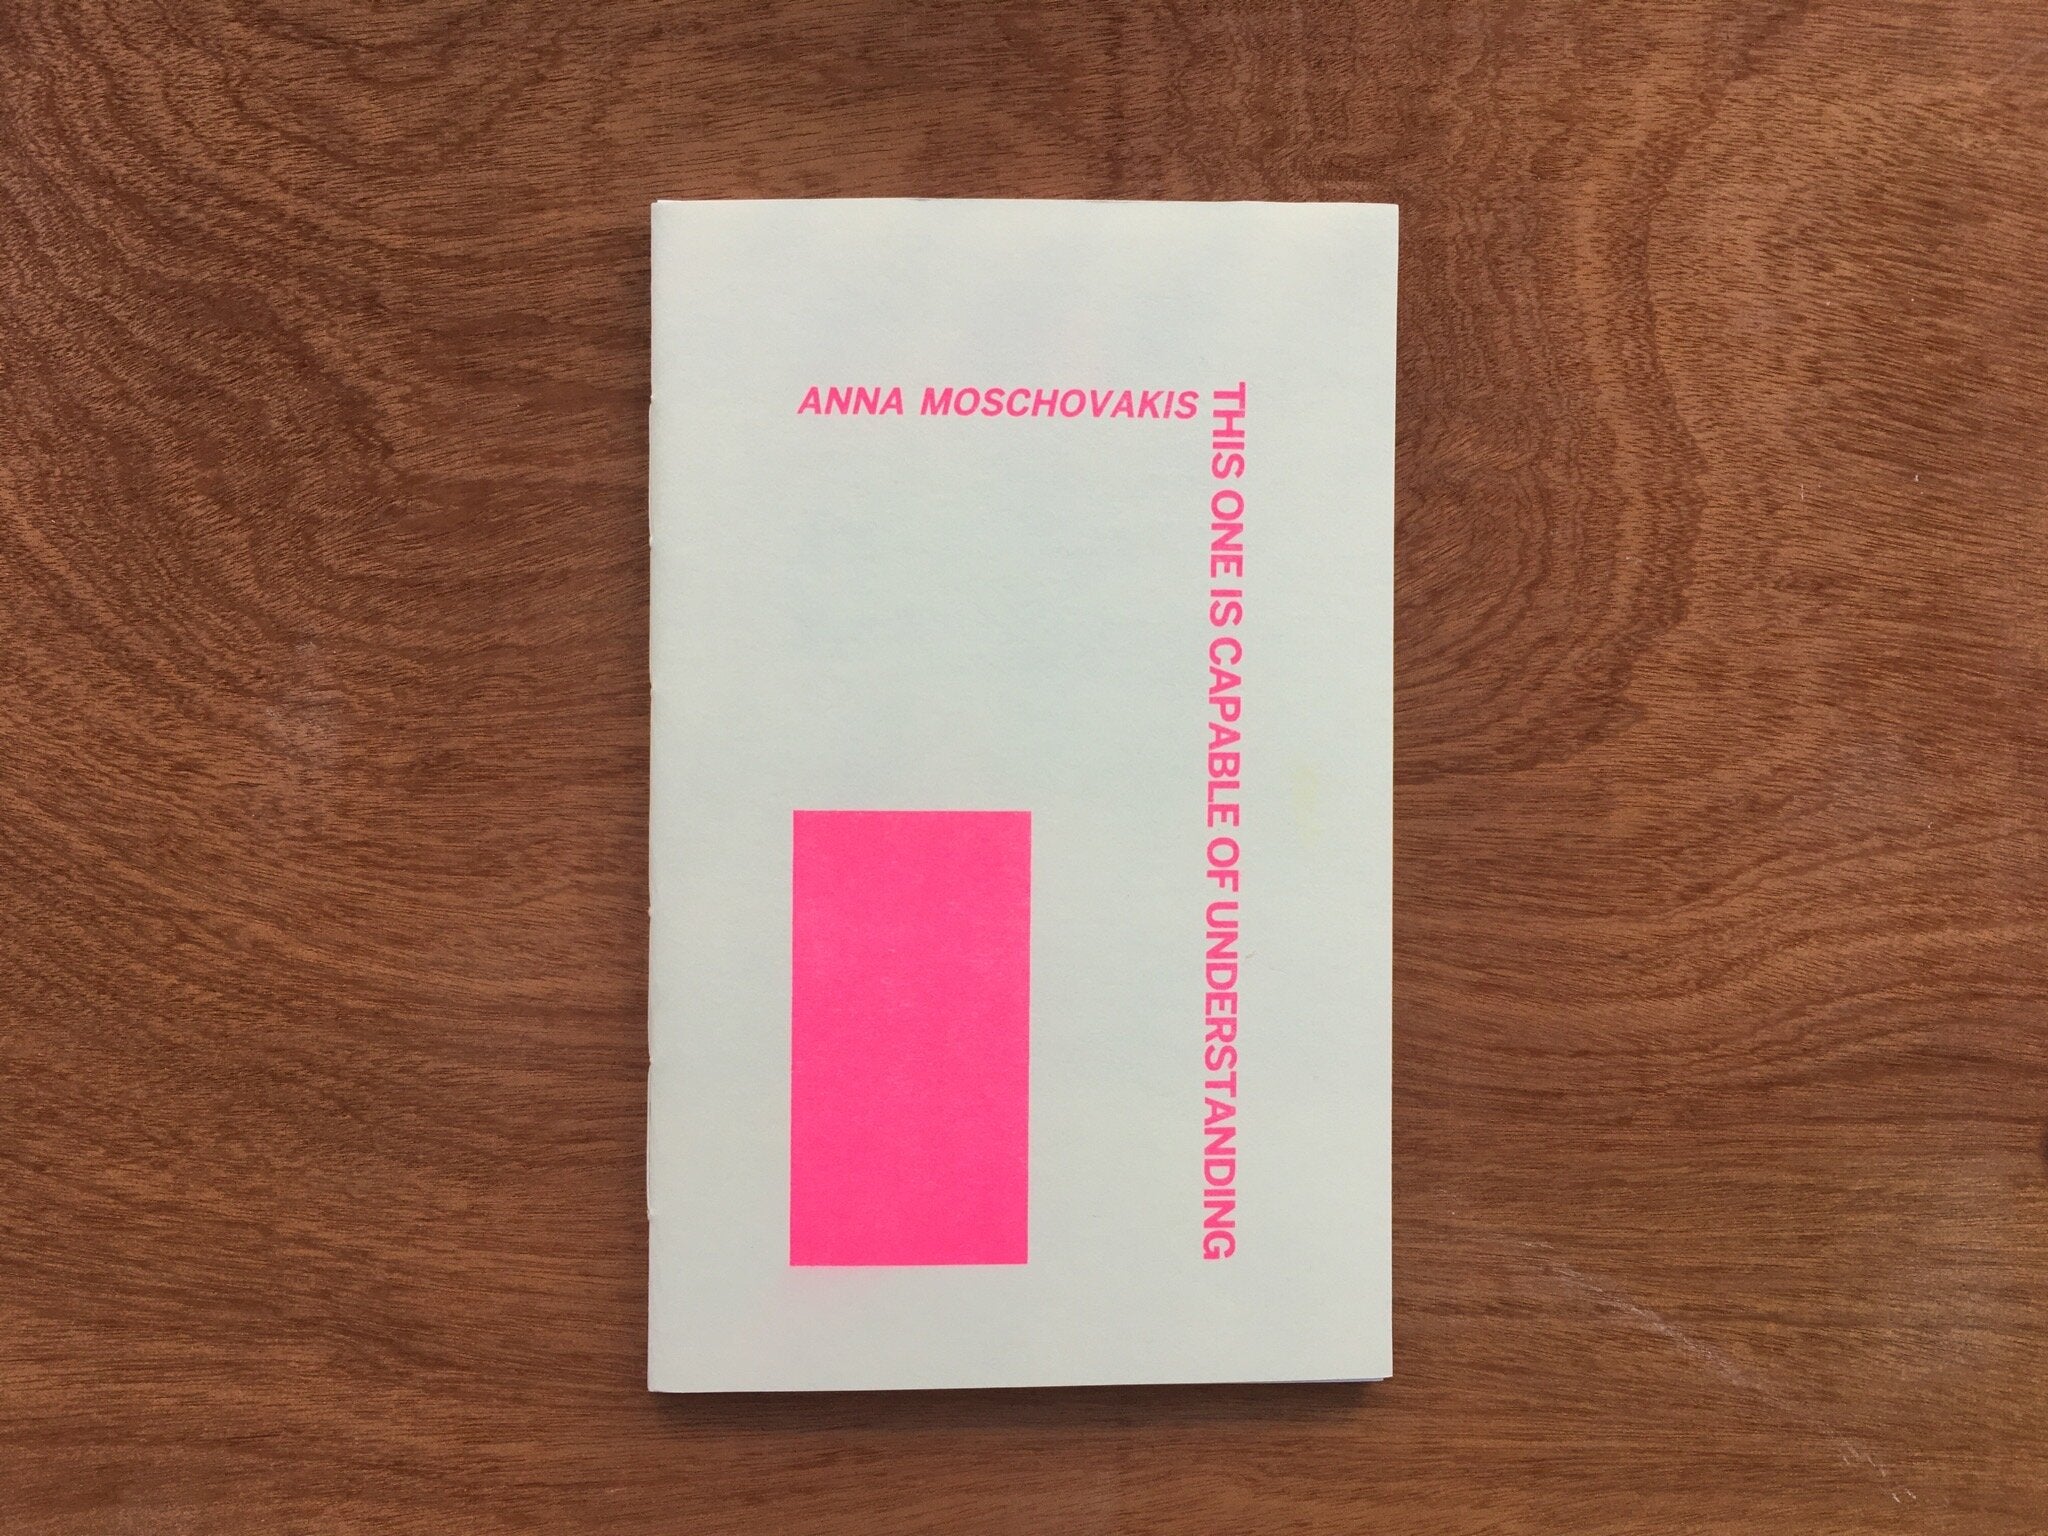 AT SOME POINT I BECAME (A FICTION)/THIS ONE IS CAPABLE OF UNDERSTANDING by Anna Moschovakis